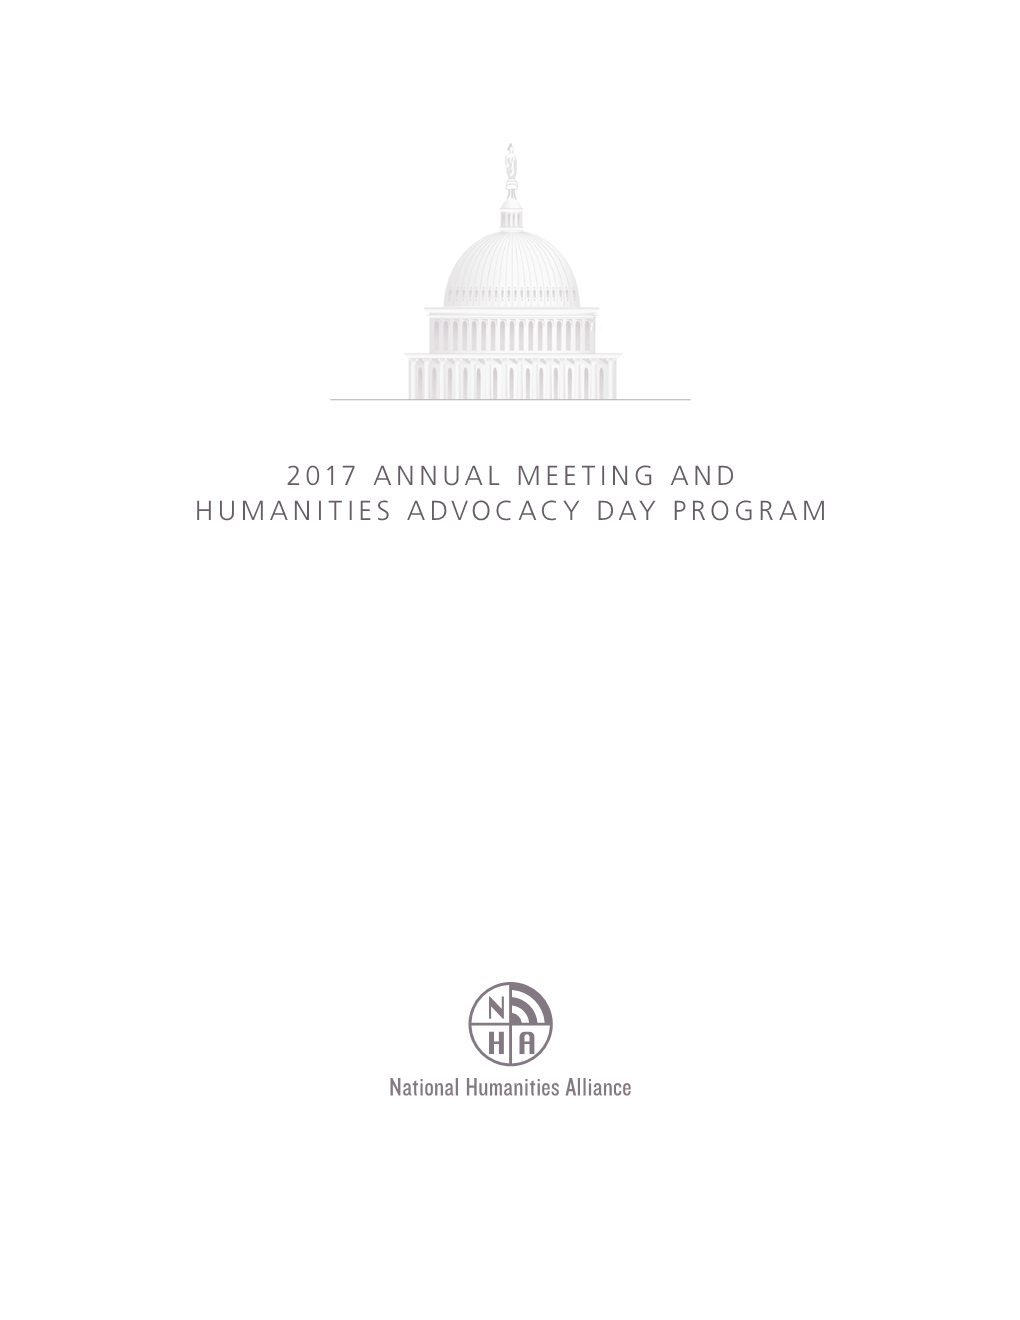 2017 Annual Meeting and Humanities Advocacy Day Program Contents